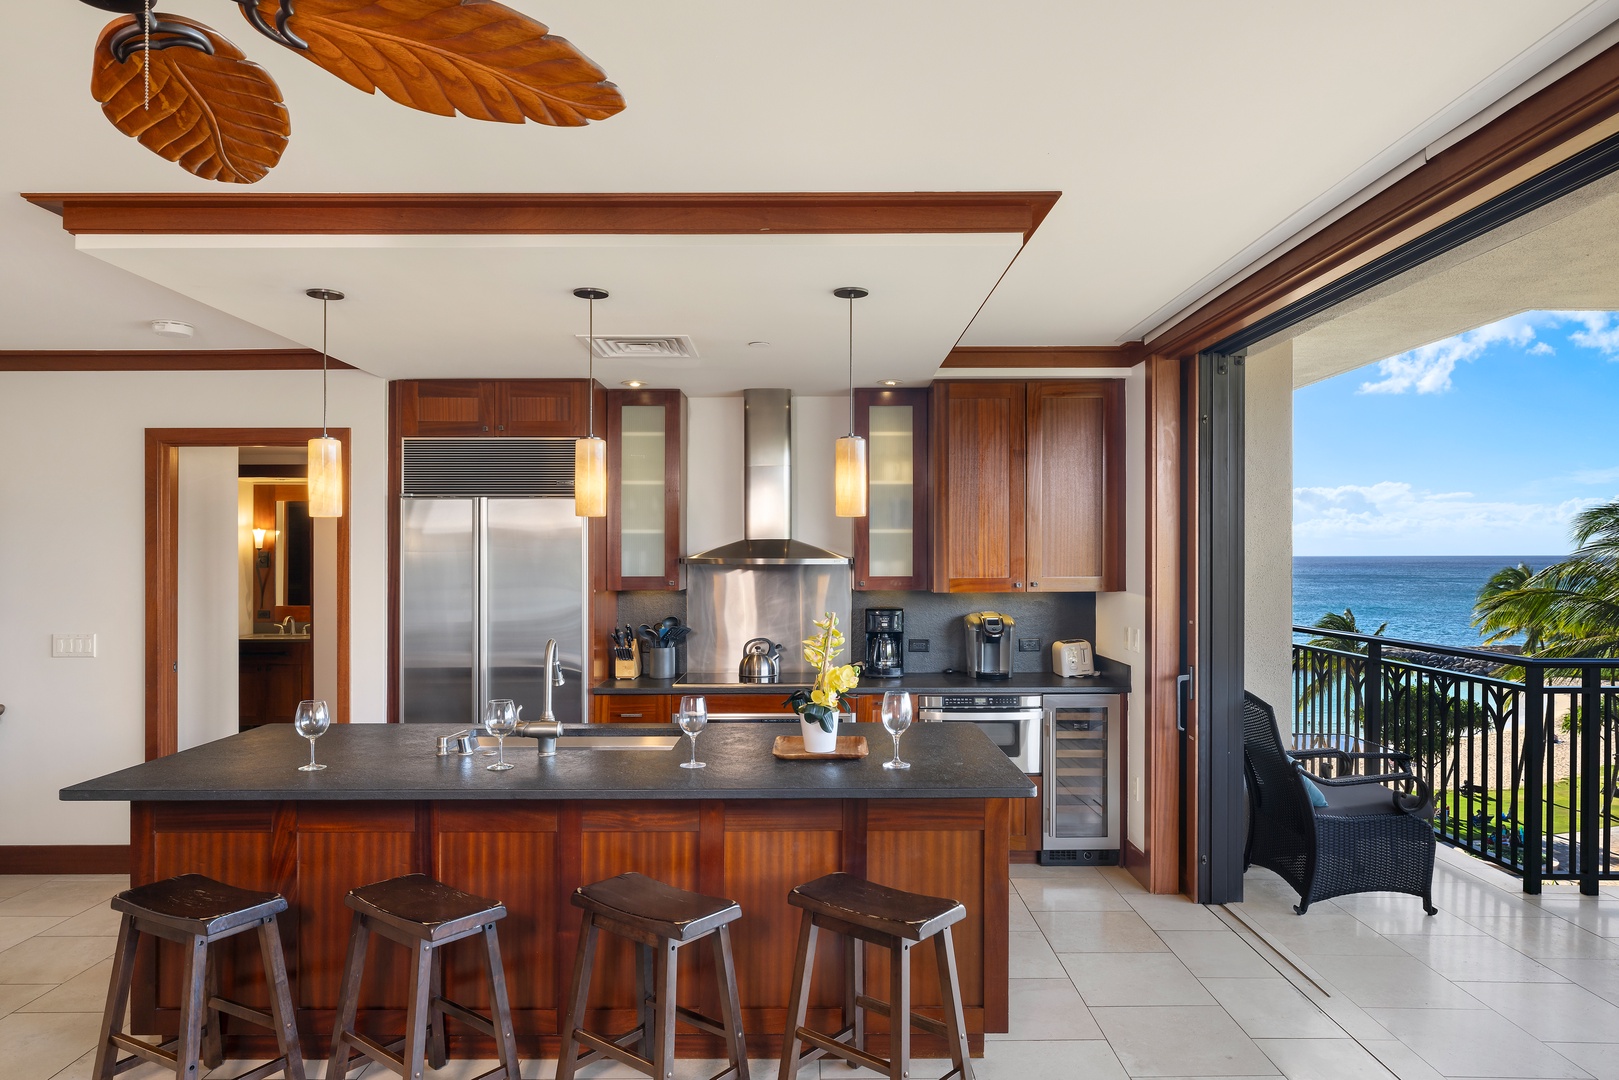 Kapolei Vacation Rentals, Ko Olina Beach Villas B506 - A Roy Yamaguci designed kitchen with stainless steel appliances and a cozy living room area.